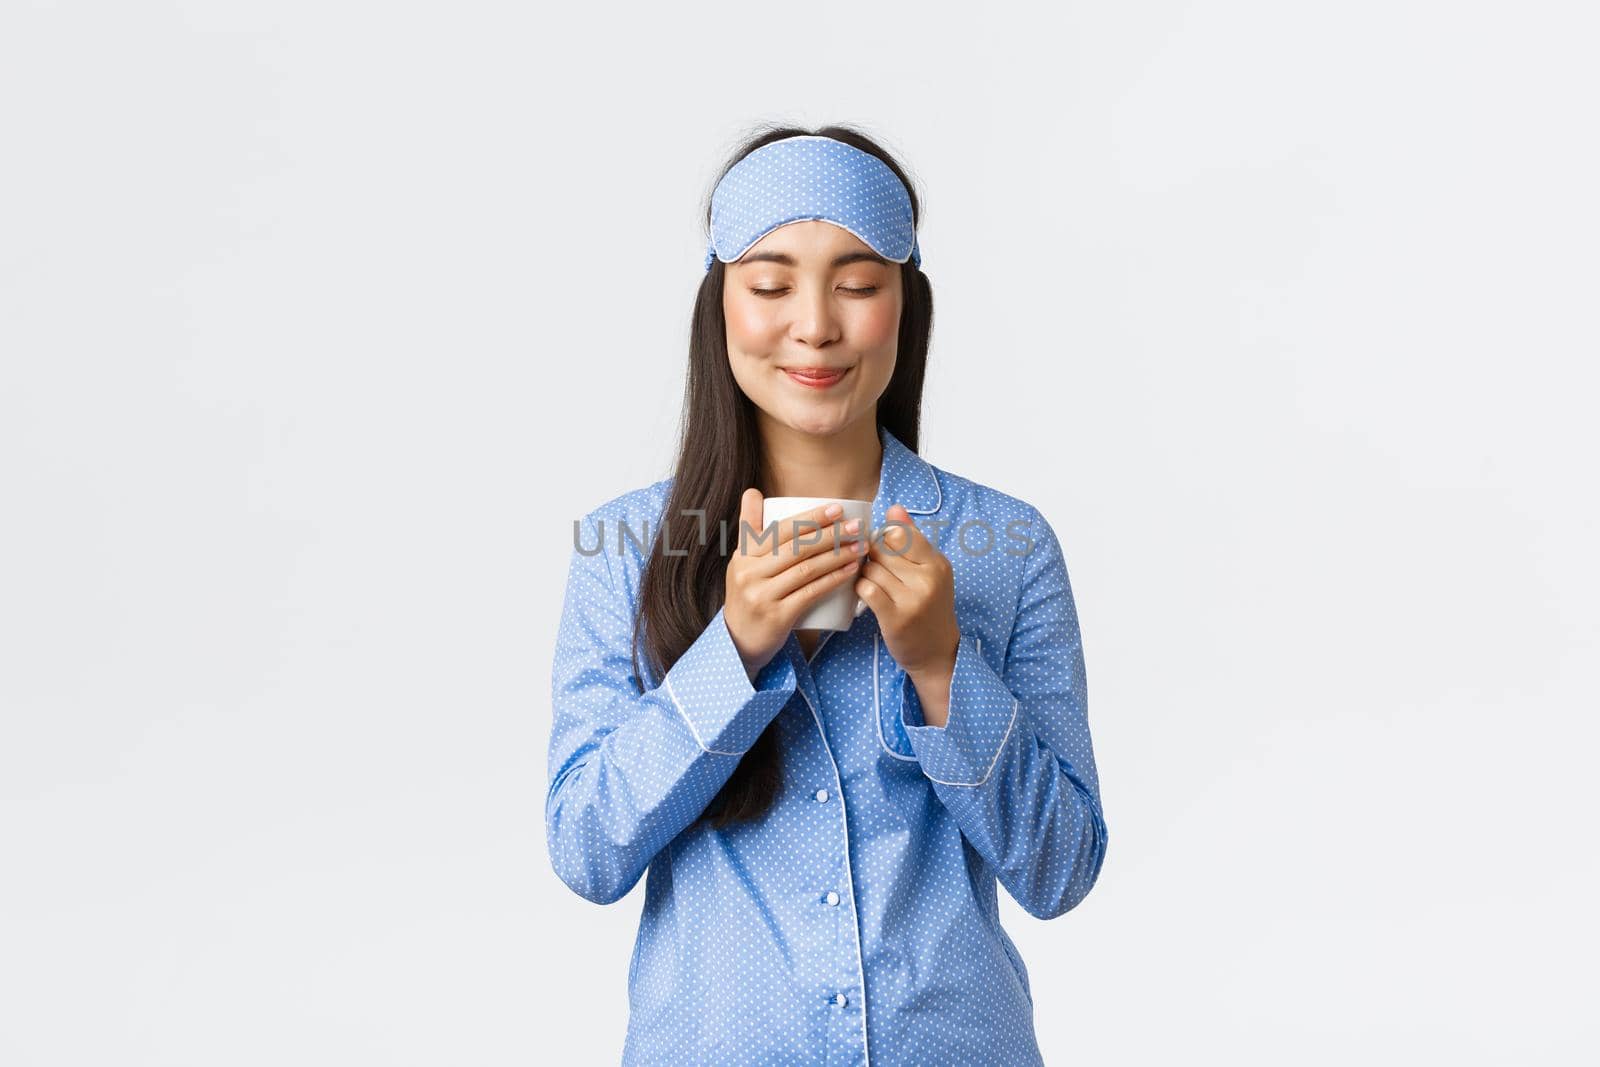 Morning lifestyle, breakfast and people concept. Smiling beautiful asian girl in sleeping mask and pyjamas enjoying nice smell of freshly made coffee, close eyes and grin delighted, white background.